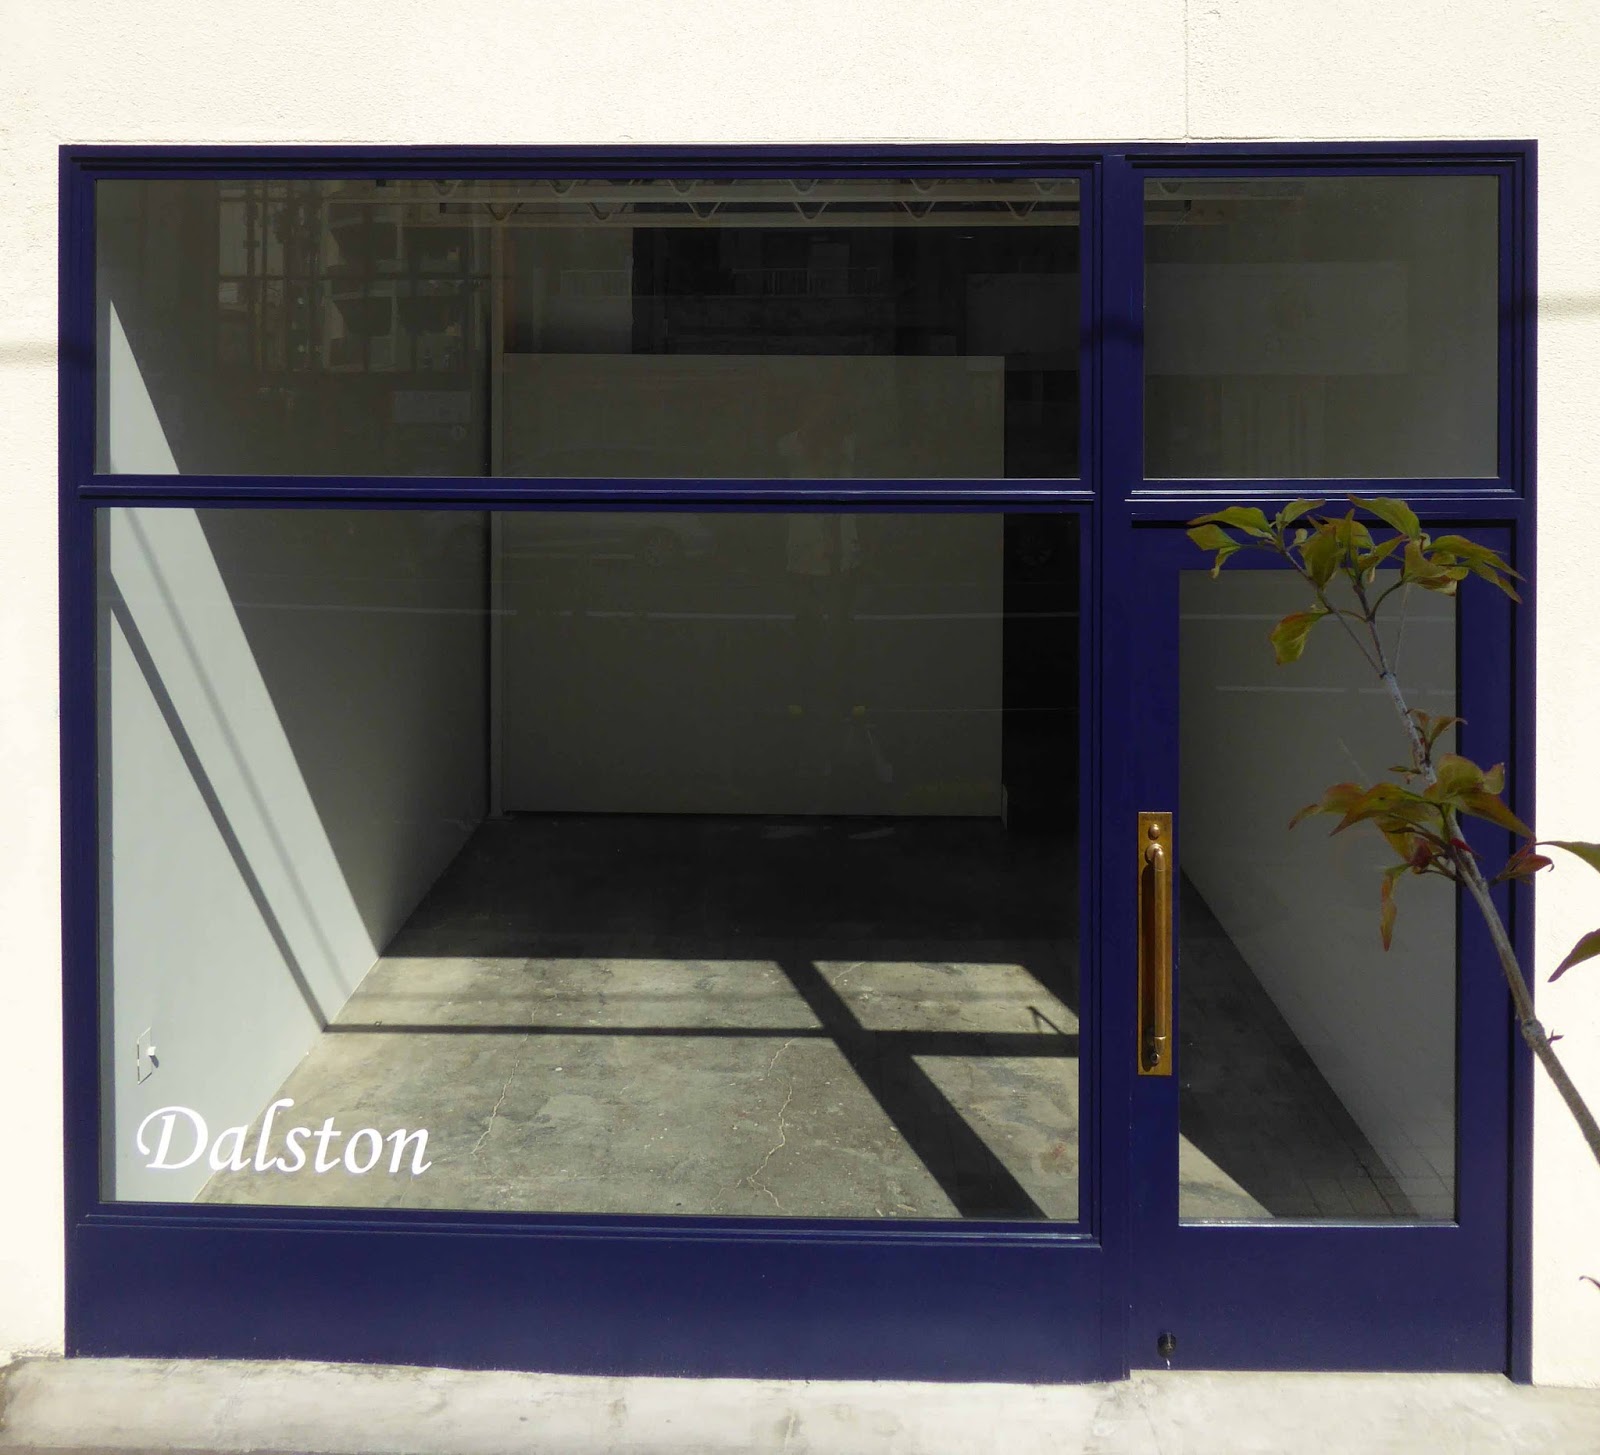 Gallery Dalstonにて